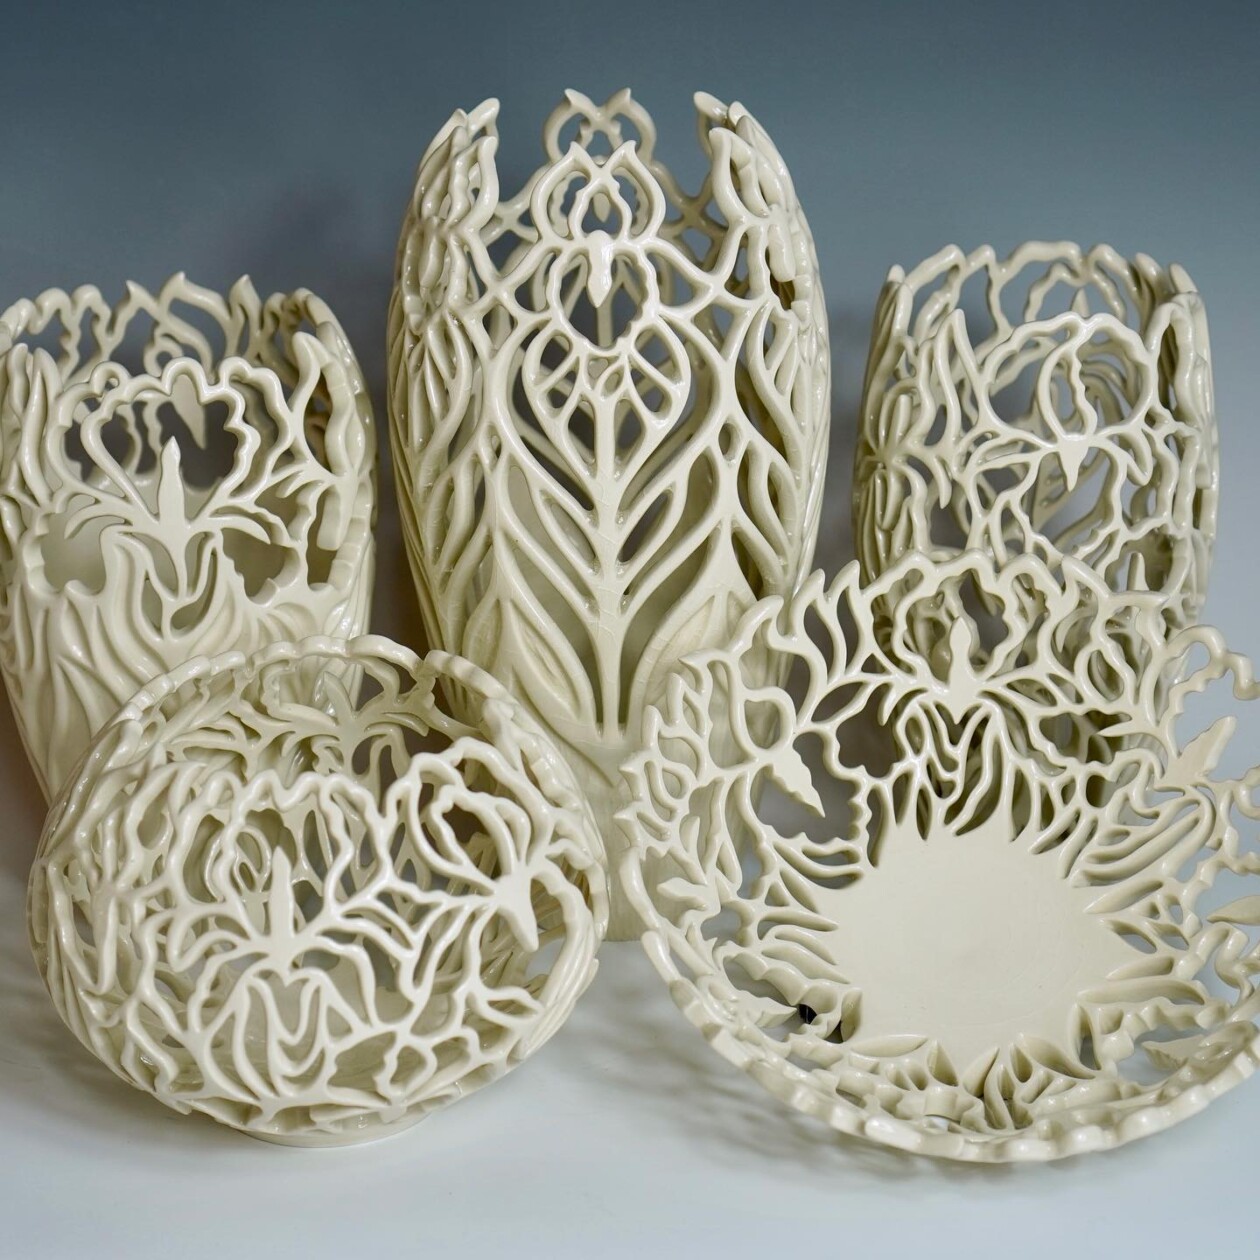 Detailed Hand Carved Porcelain Pieces By Annie Quigley (3)